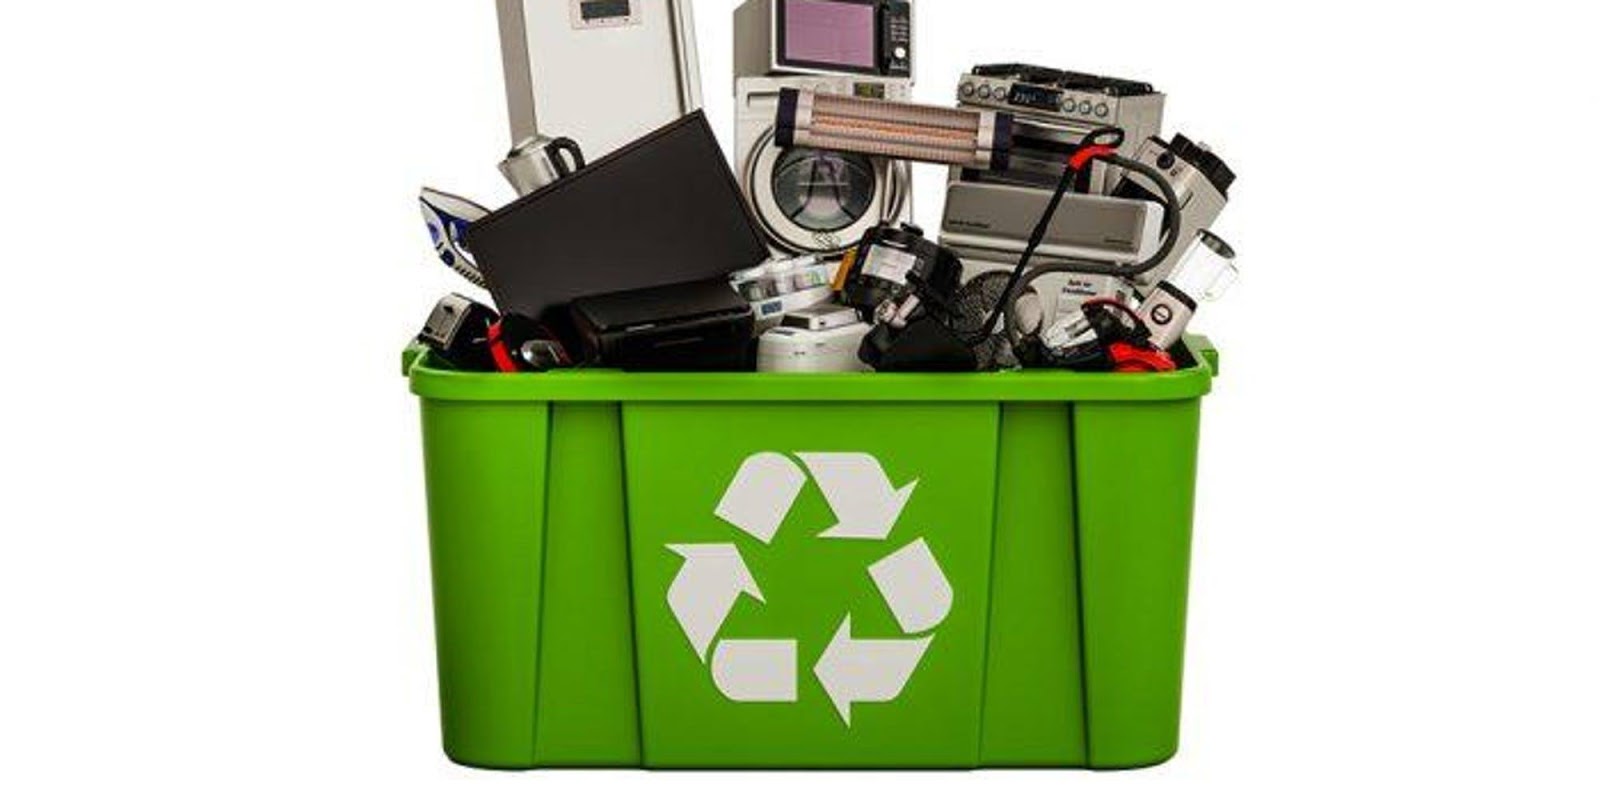 Putting Down Roots: Maren's List: Sep 22: Electronics recycling event